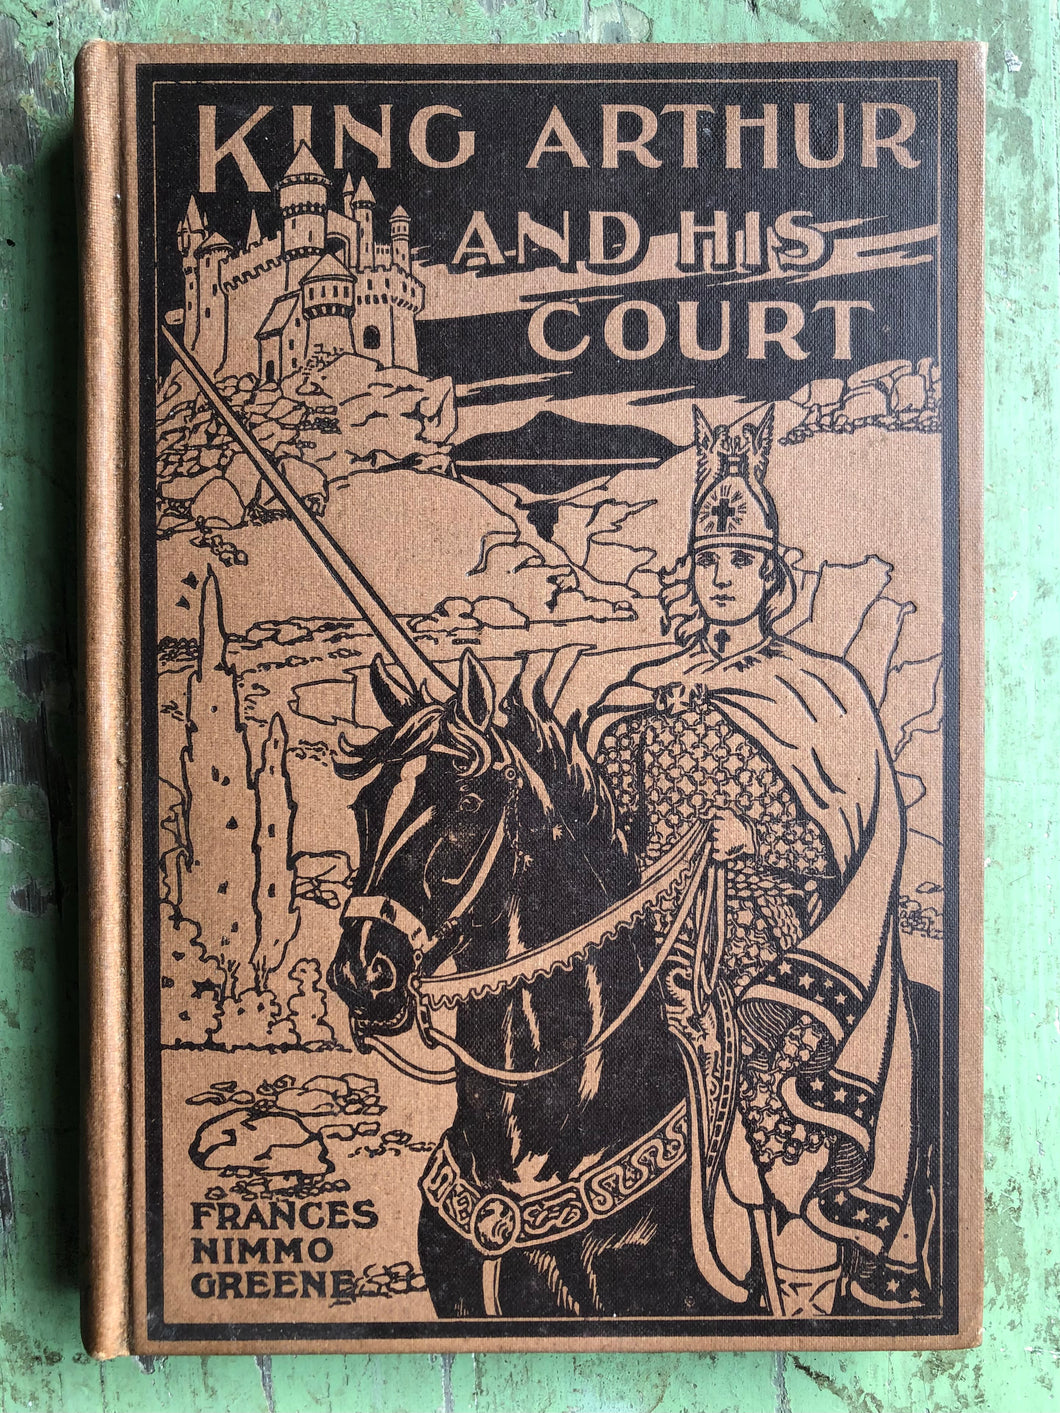 Legends of King Arthur and His Court by Frances Nimmo Greene and illustrated with original drawings by Edmund H. Garrett